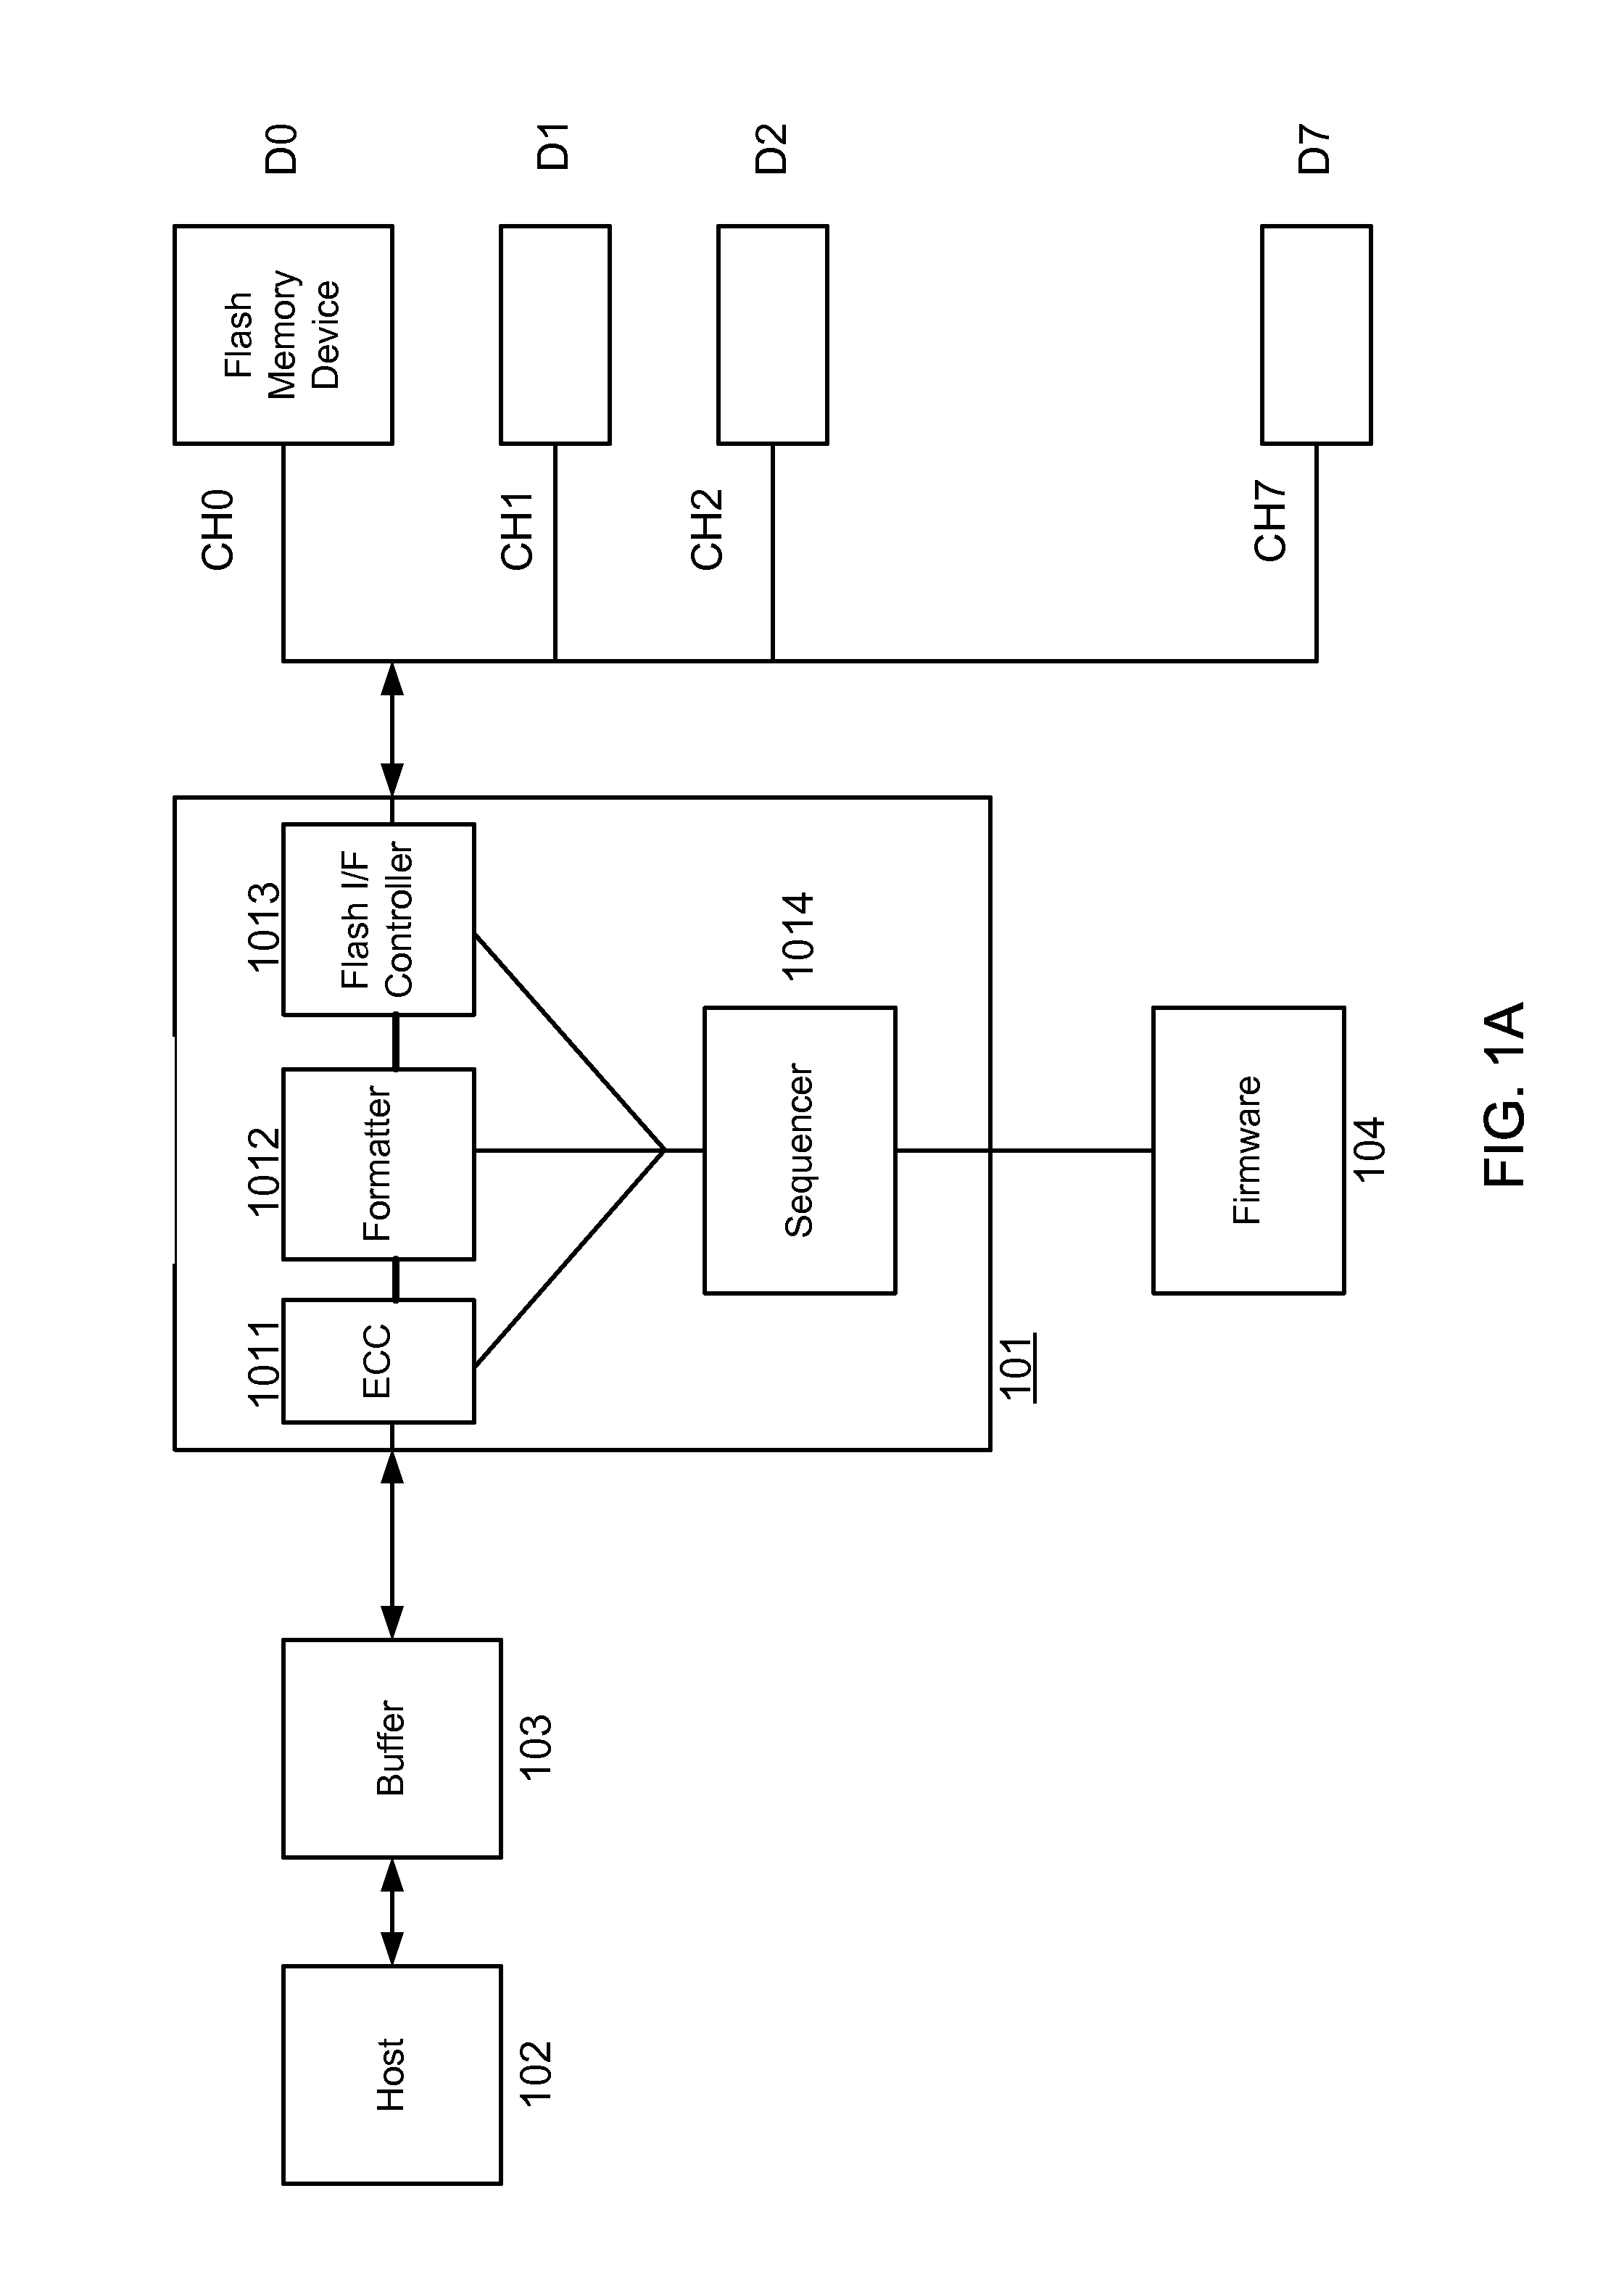 Flexible Sequencer Design Architecture for Solid State Memory Controller